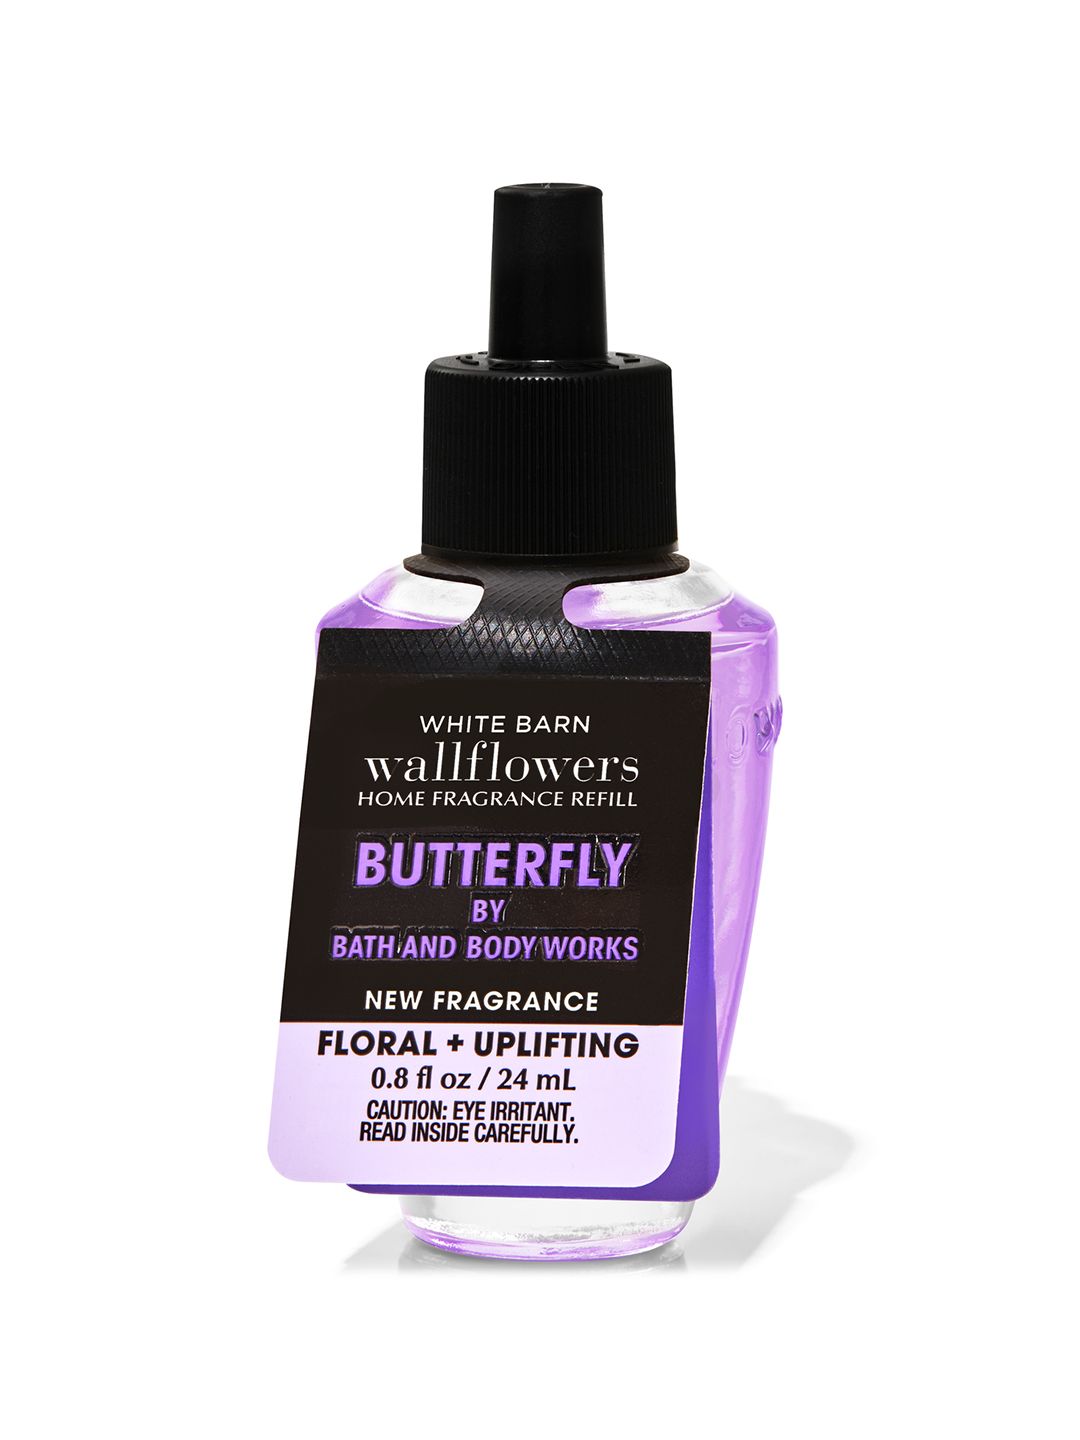 Bath & Body Works Butterfly Wallflowers Fragrance Refill - 24 ml Price in India